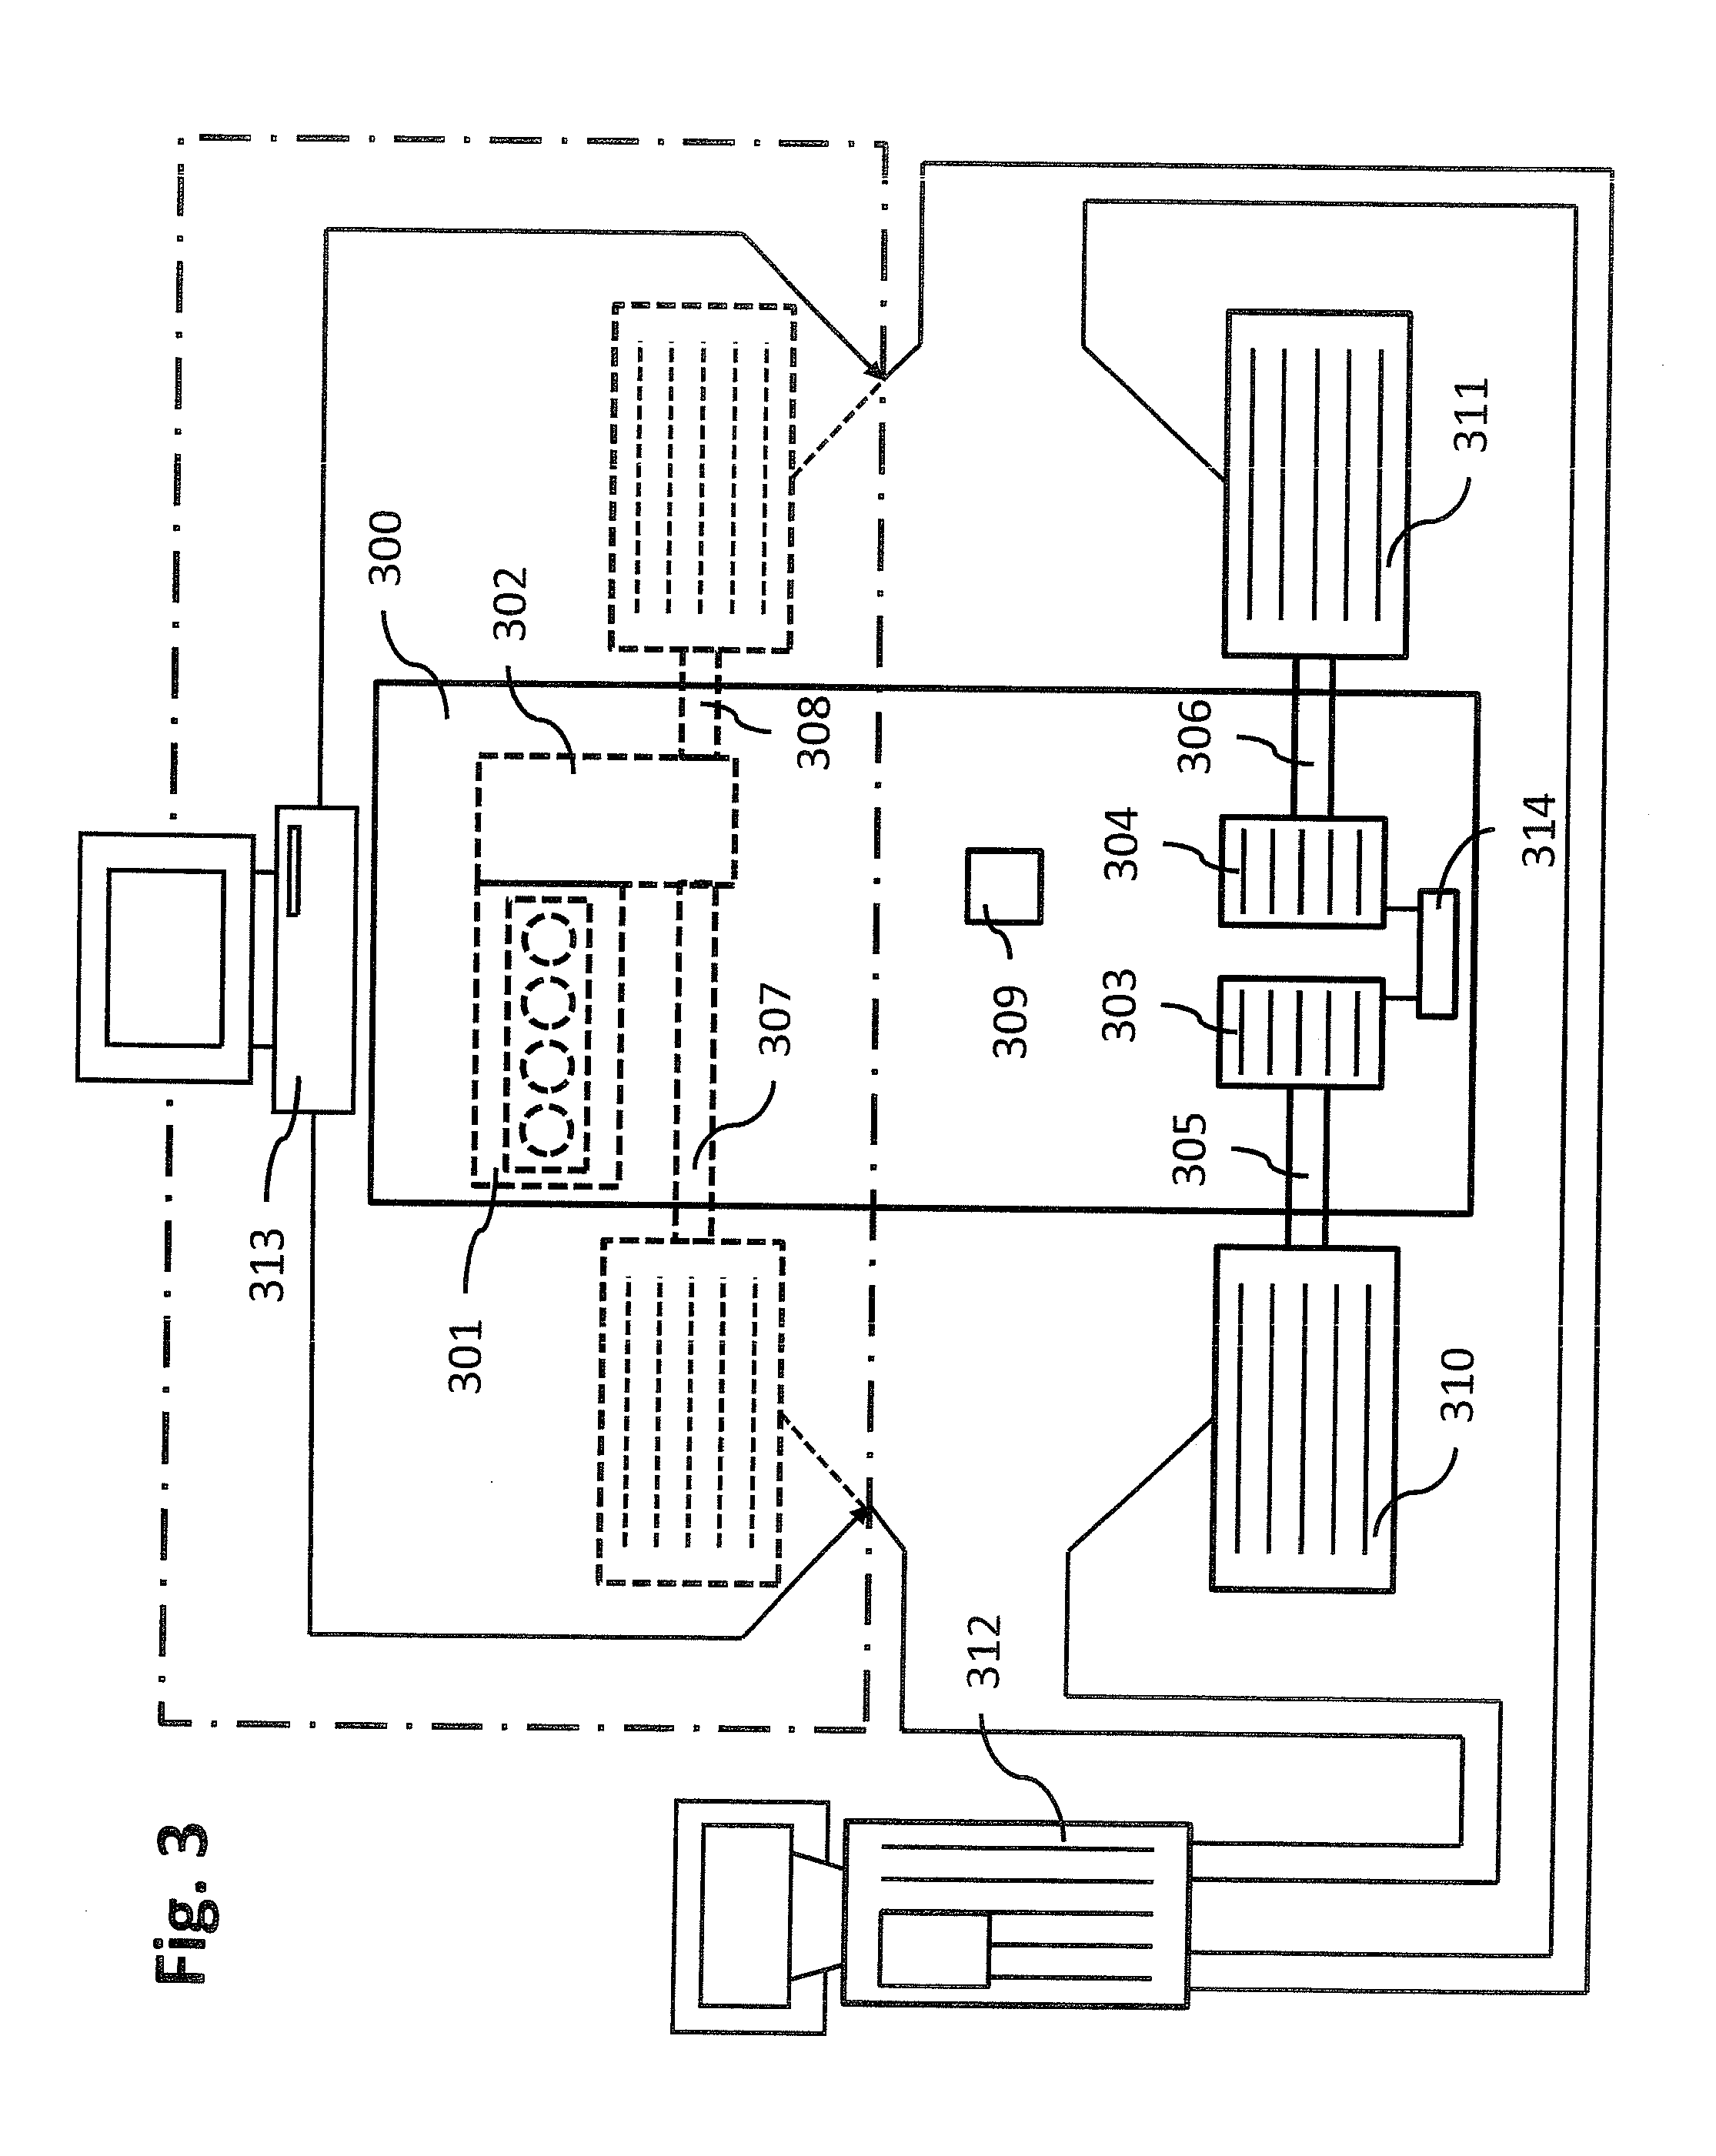 Method and device for dynamometer testing of a motor vehicle